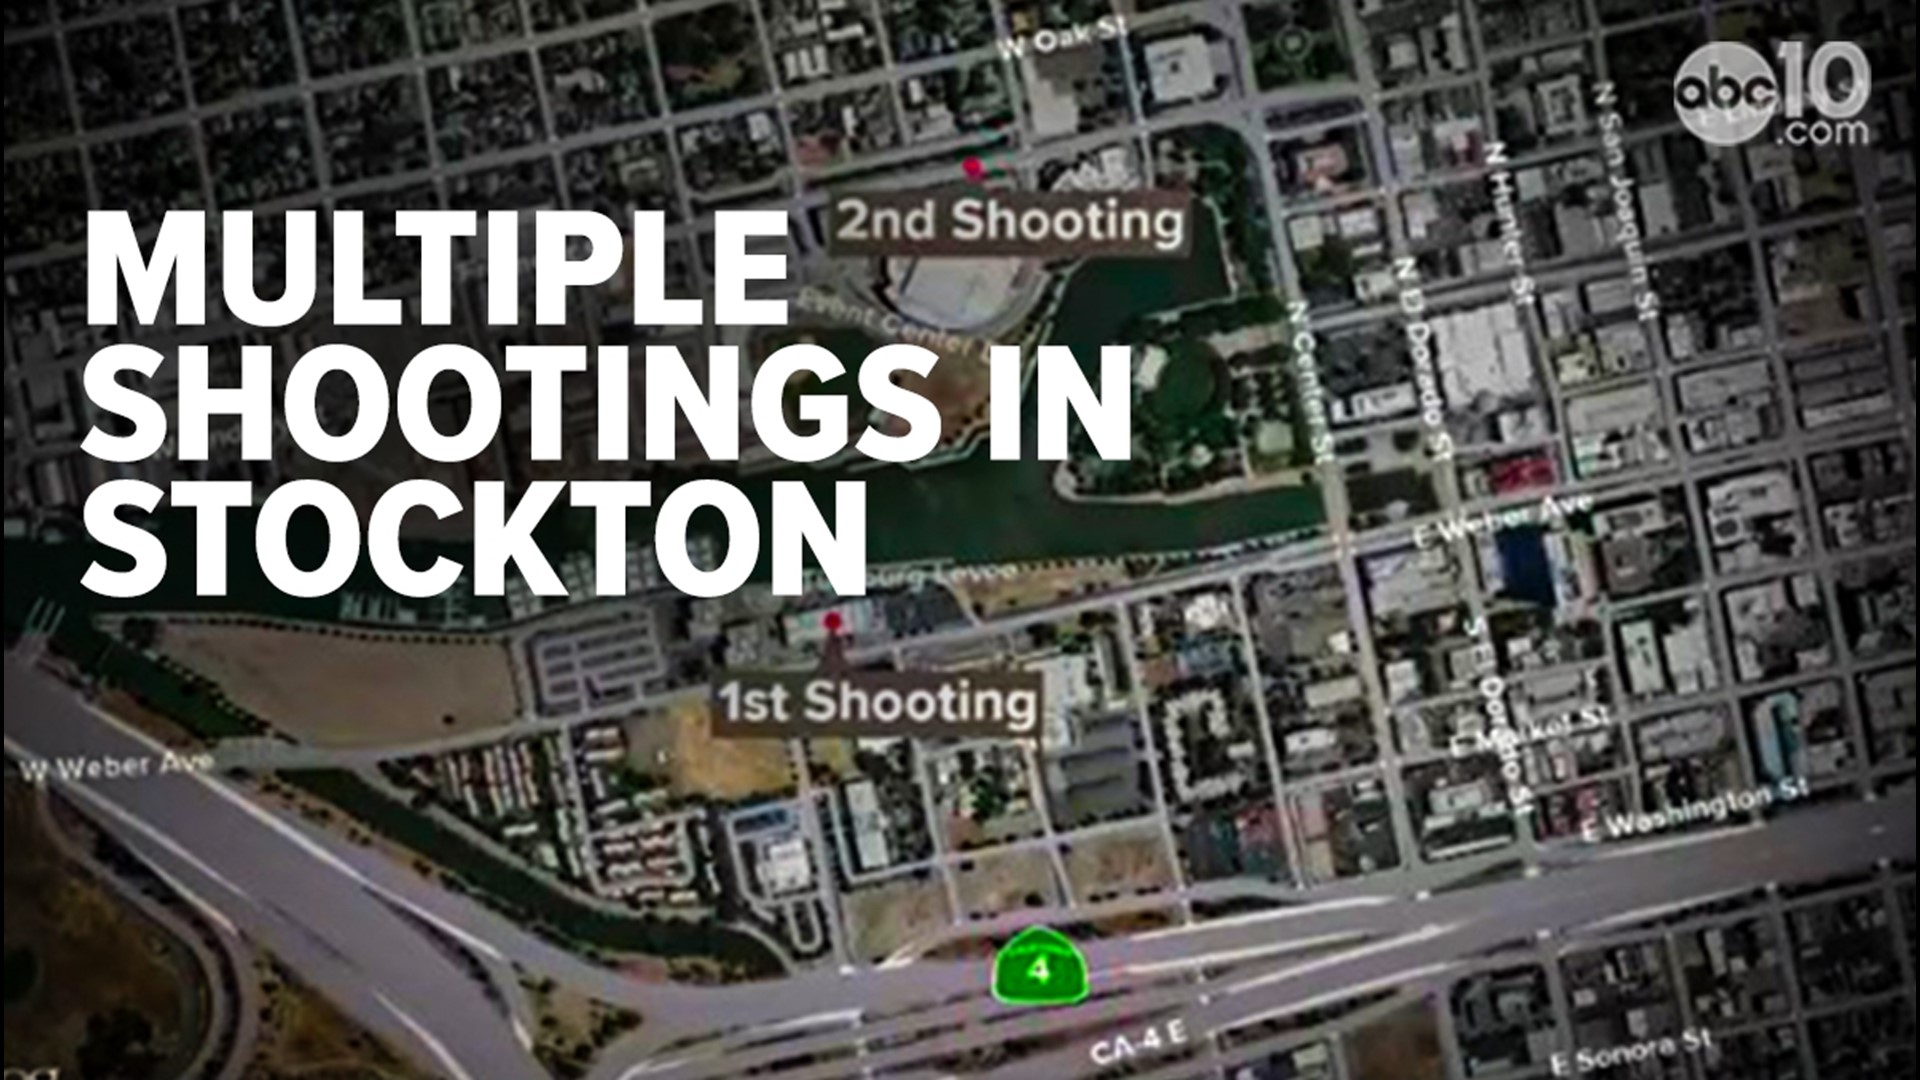 The two separate shootings are reportedly unrelated. One happened at an area home to several Stockton businesses and a man was killed at a restaurant Saturday.